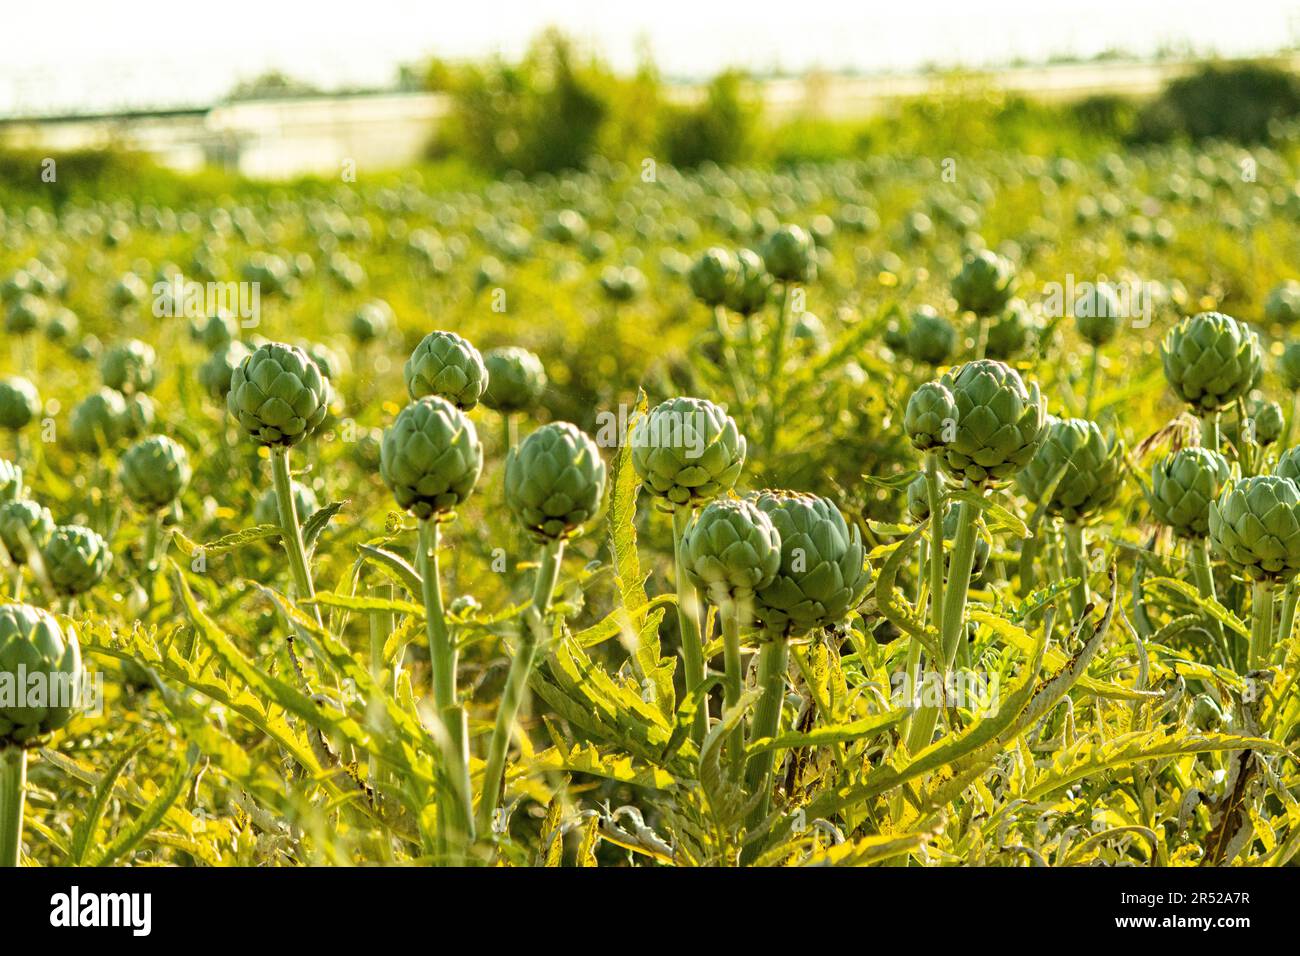 Fresh artichokes with cluster of budding flower buds growing in agriculture field under daylight on sunny day against blurred countryside Stock Photo